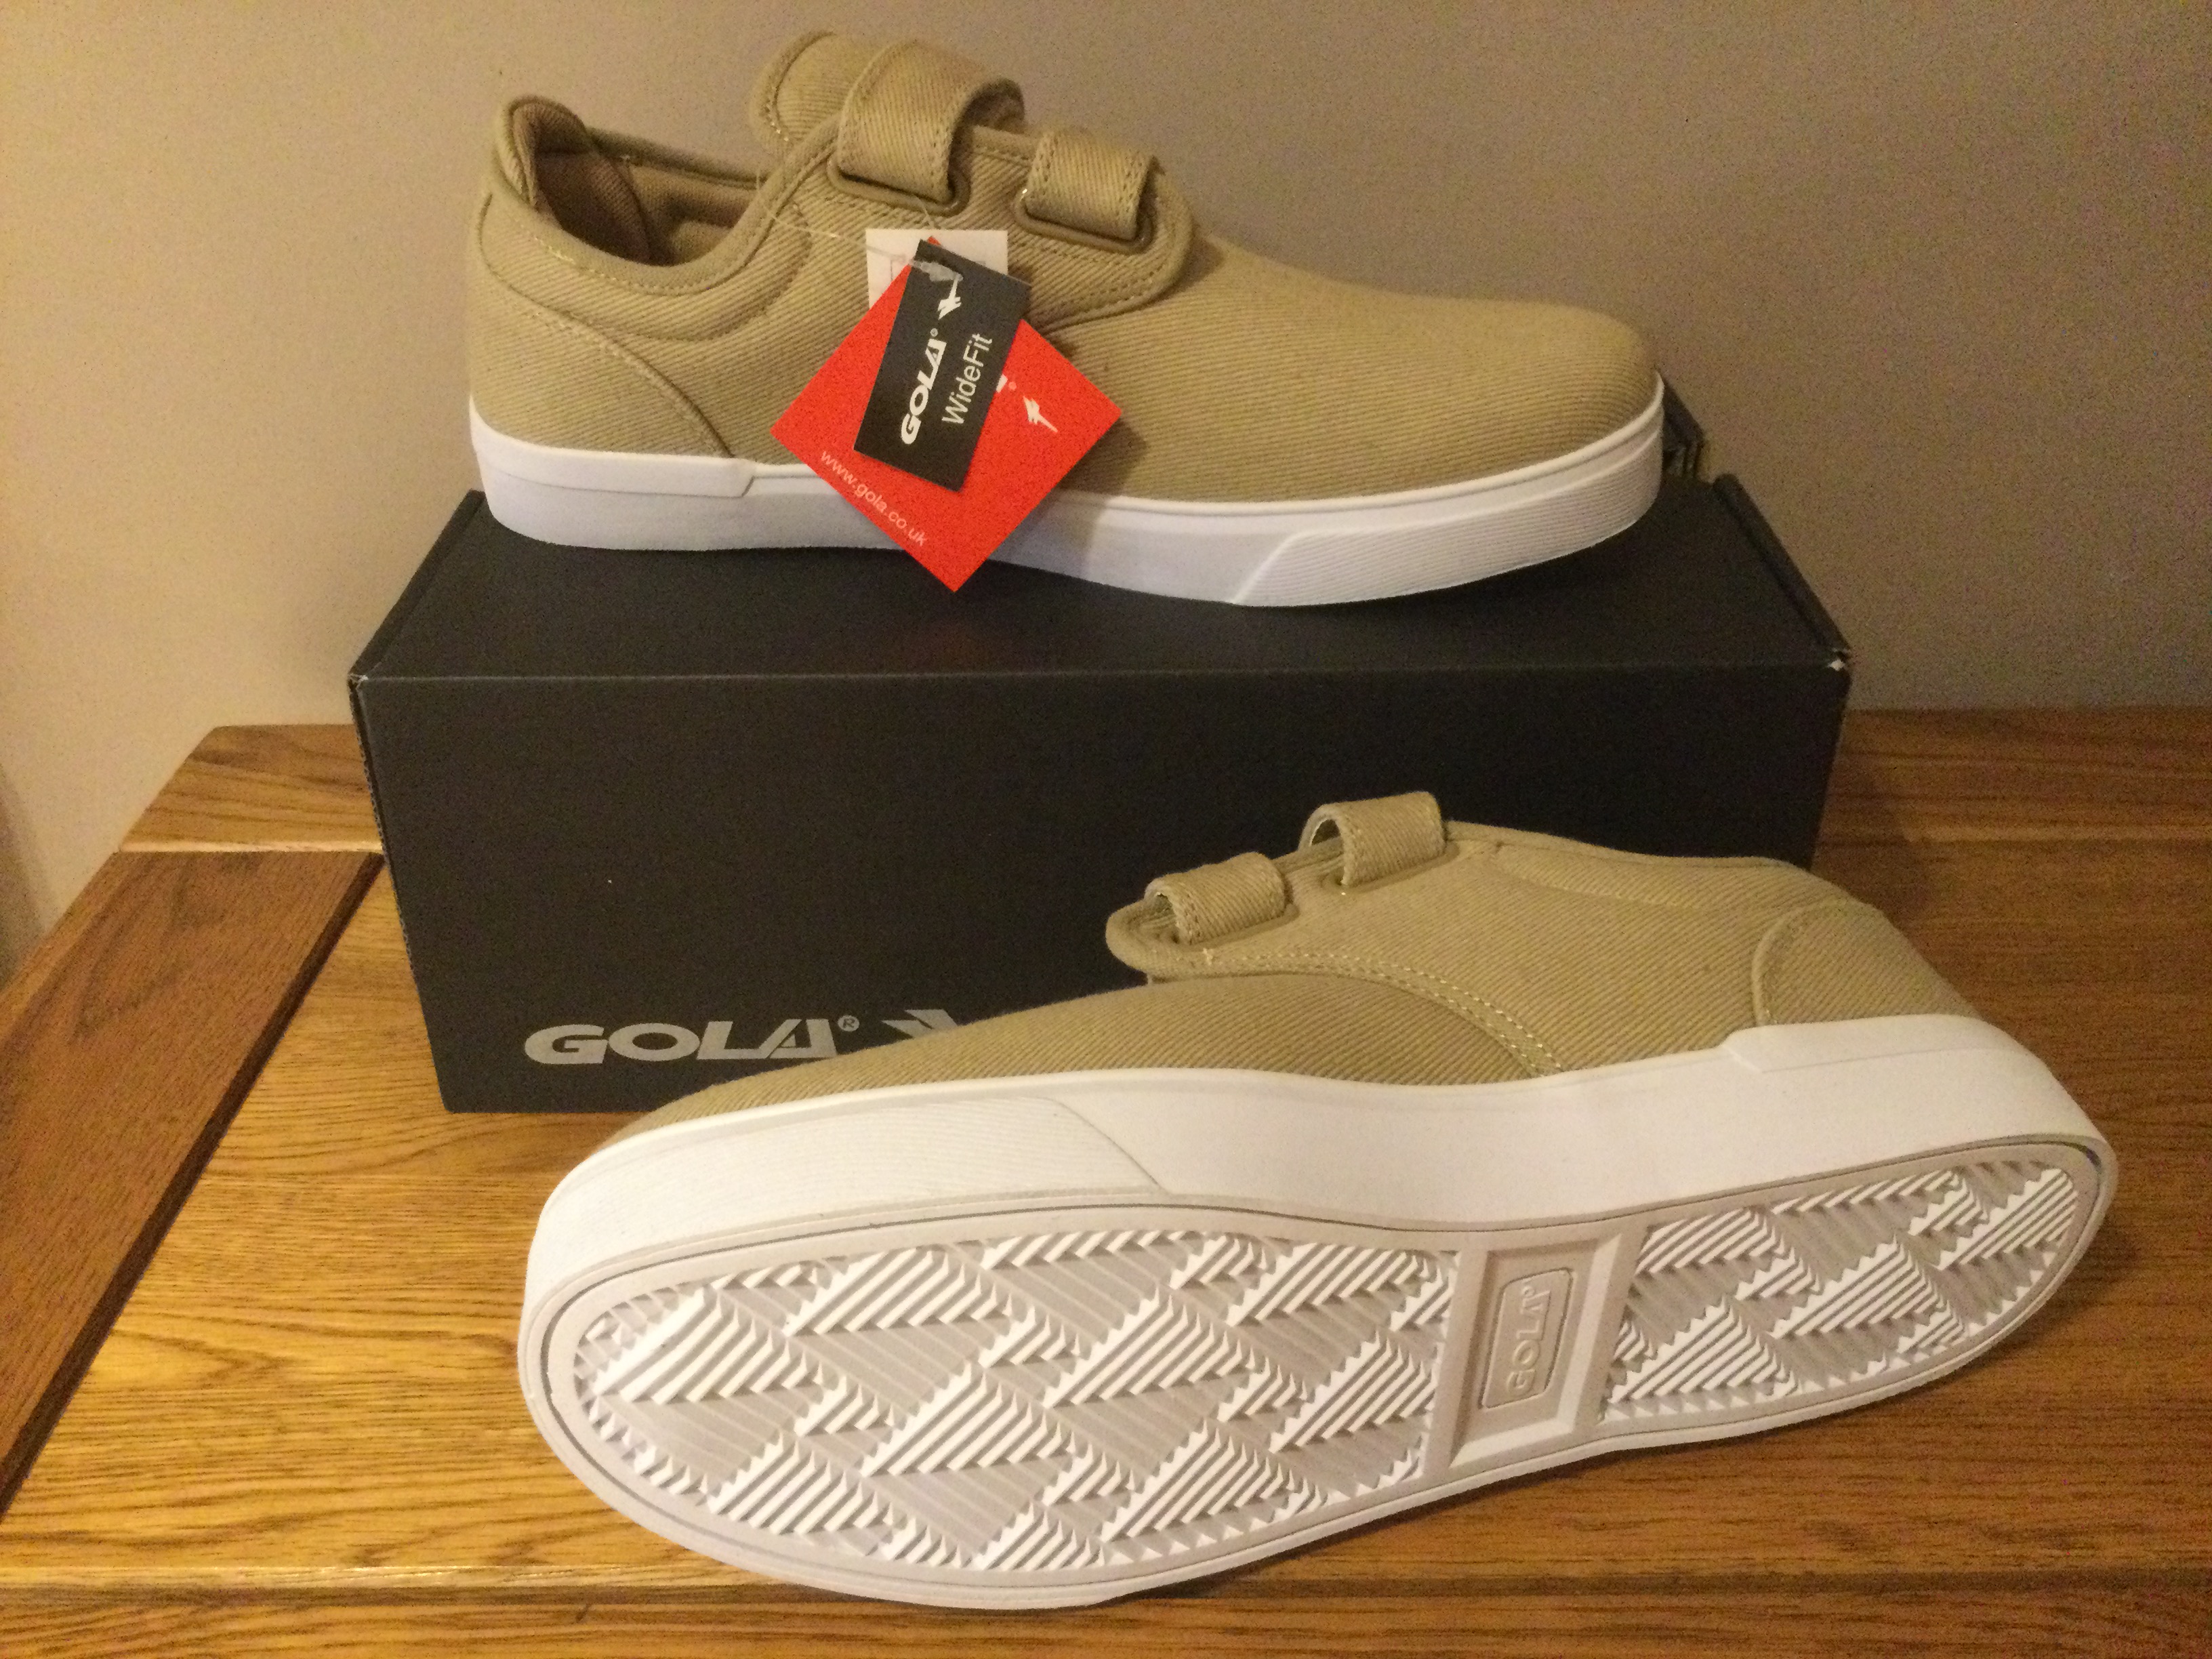 Gola “Panama” QF Mens Wide Fit Trainers, Size 10, Taupe/White - New RRP £36.00 - Image 5 of 5